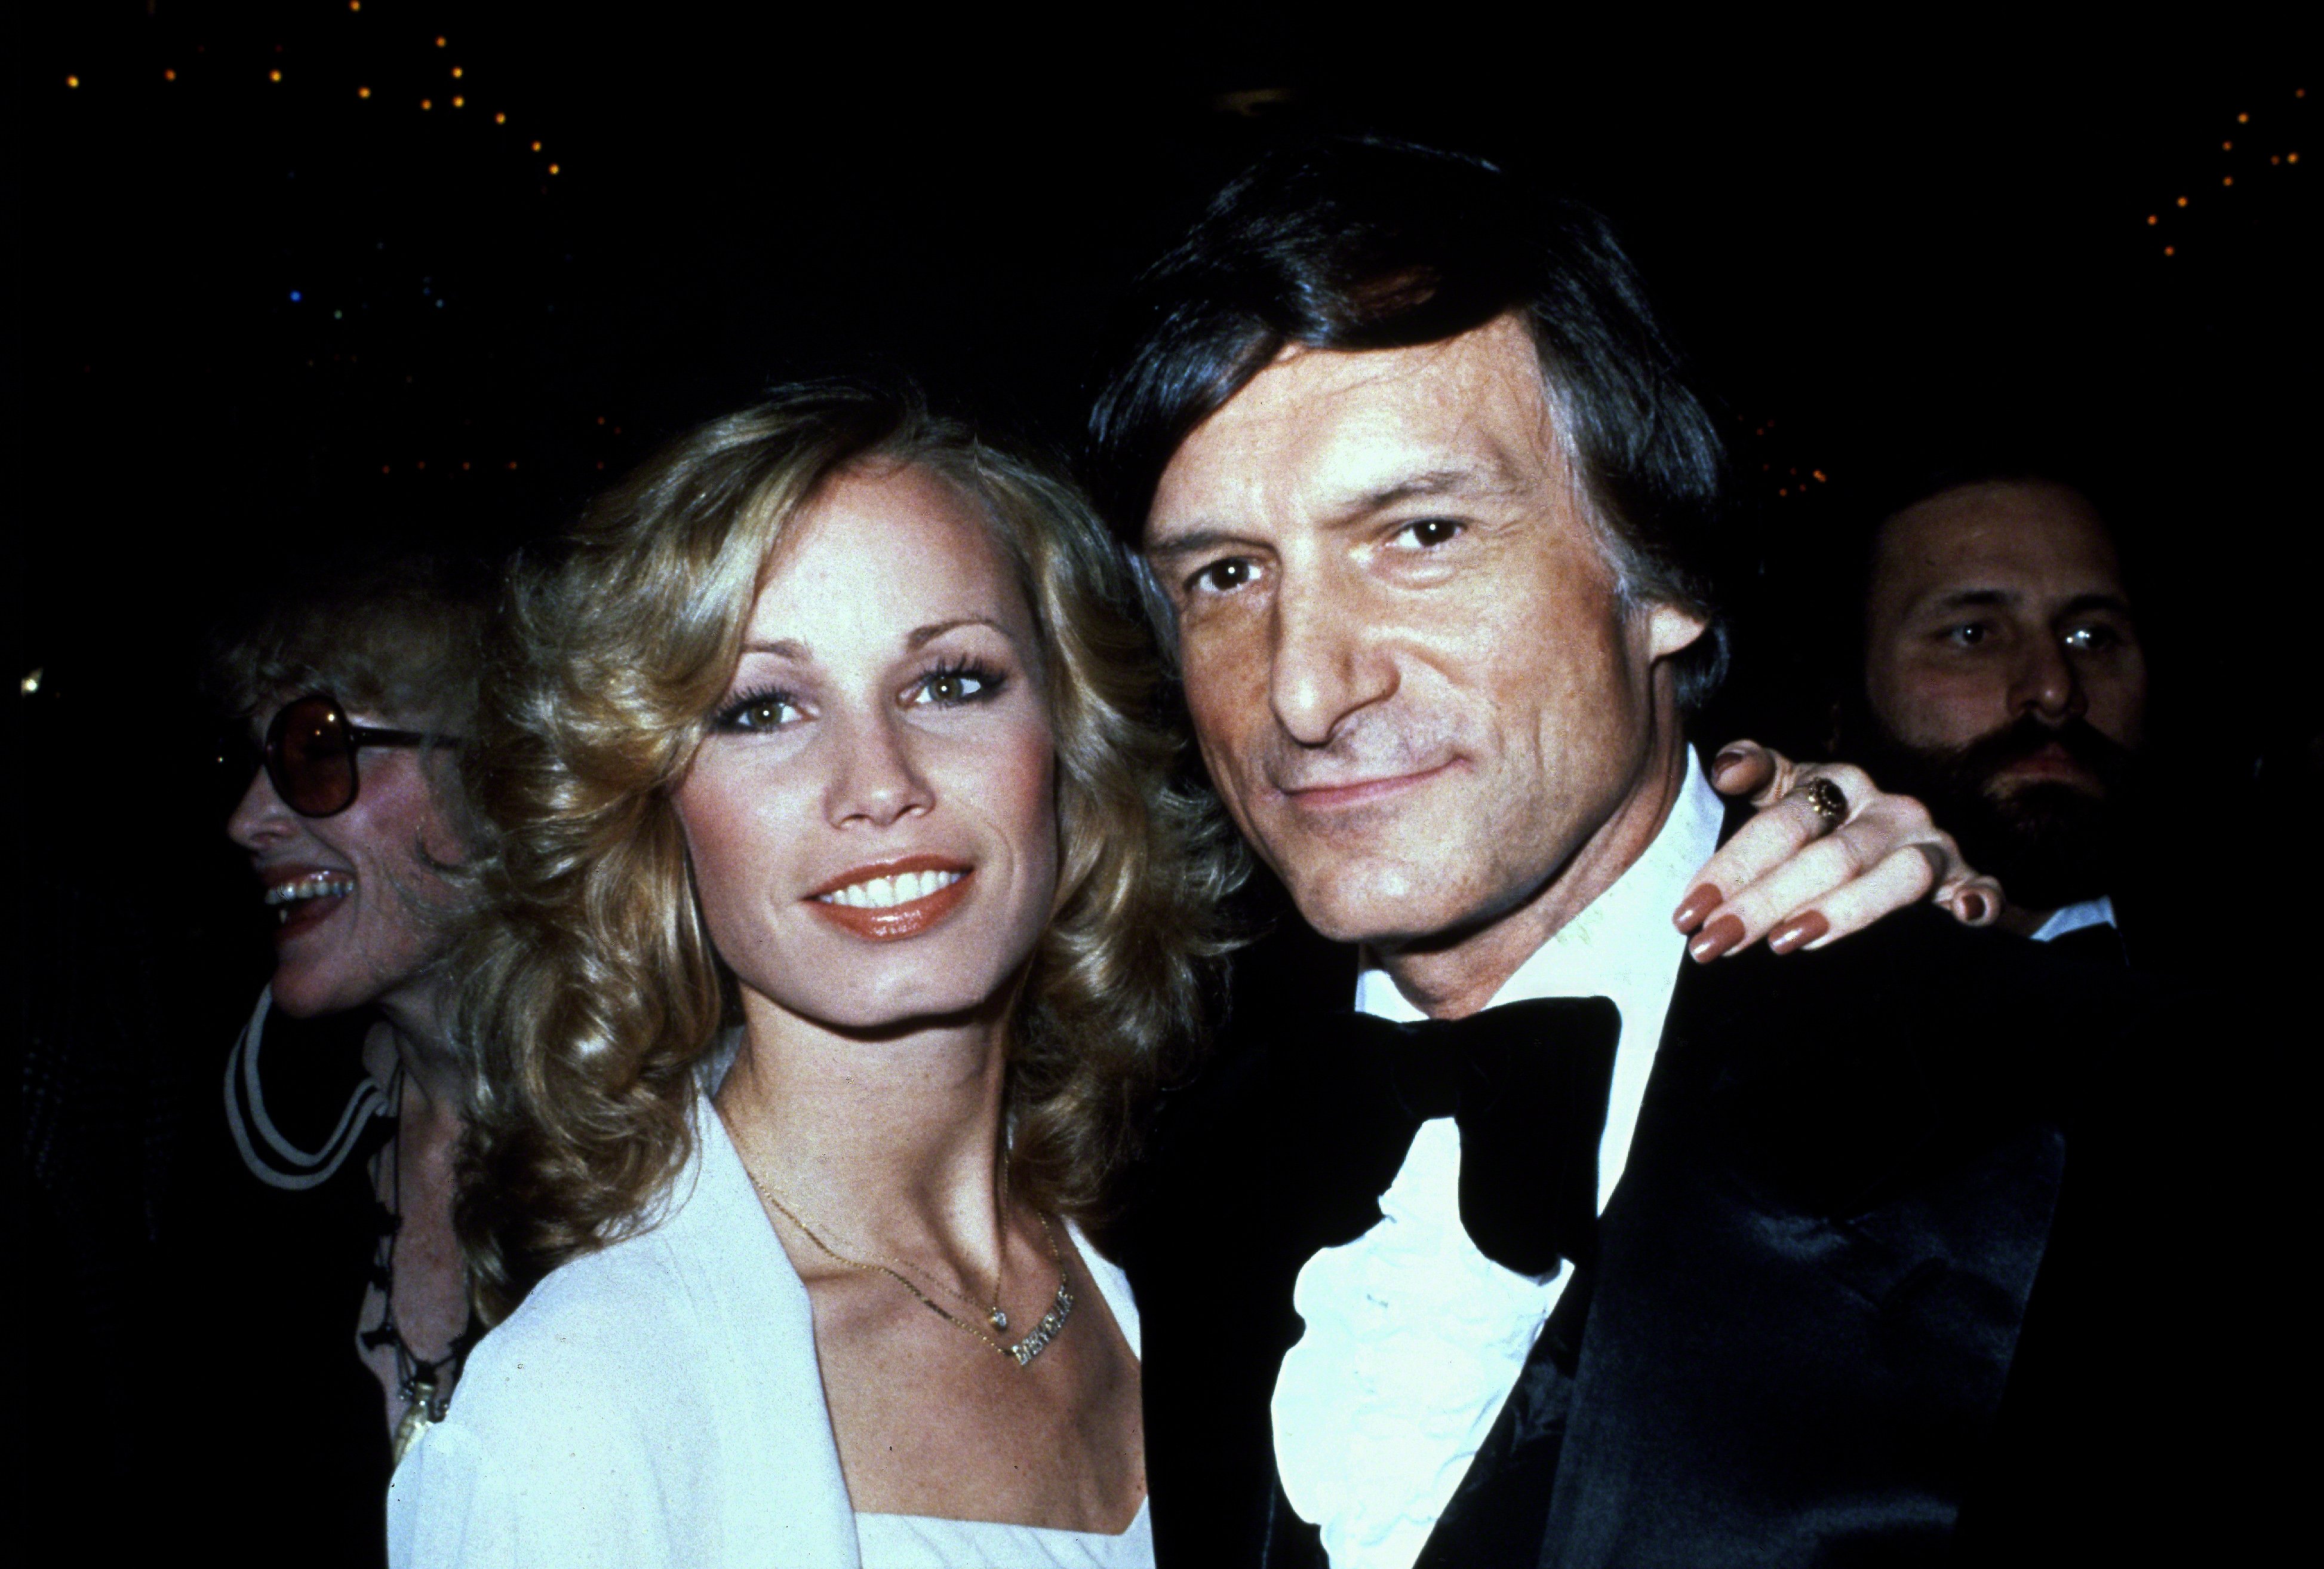 Hugh Hefner and Sondra Theodore in 1979 in New York City. | Source: Getty Images